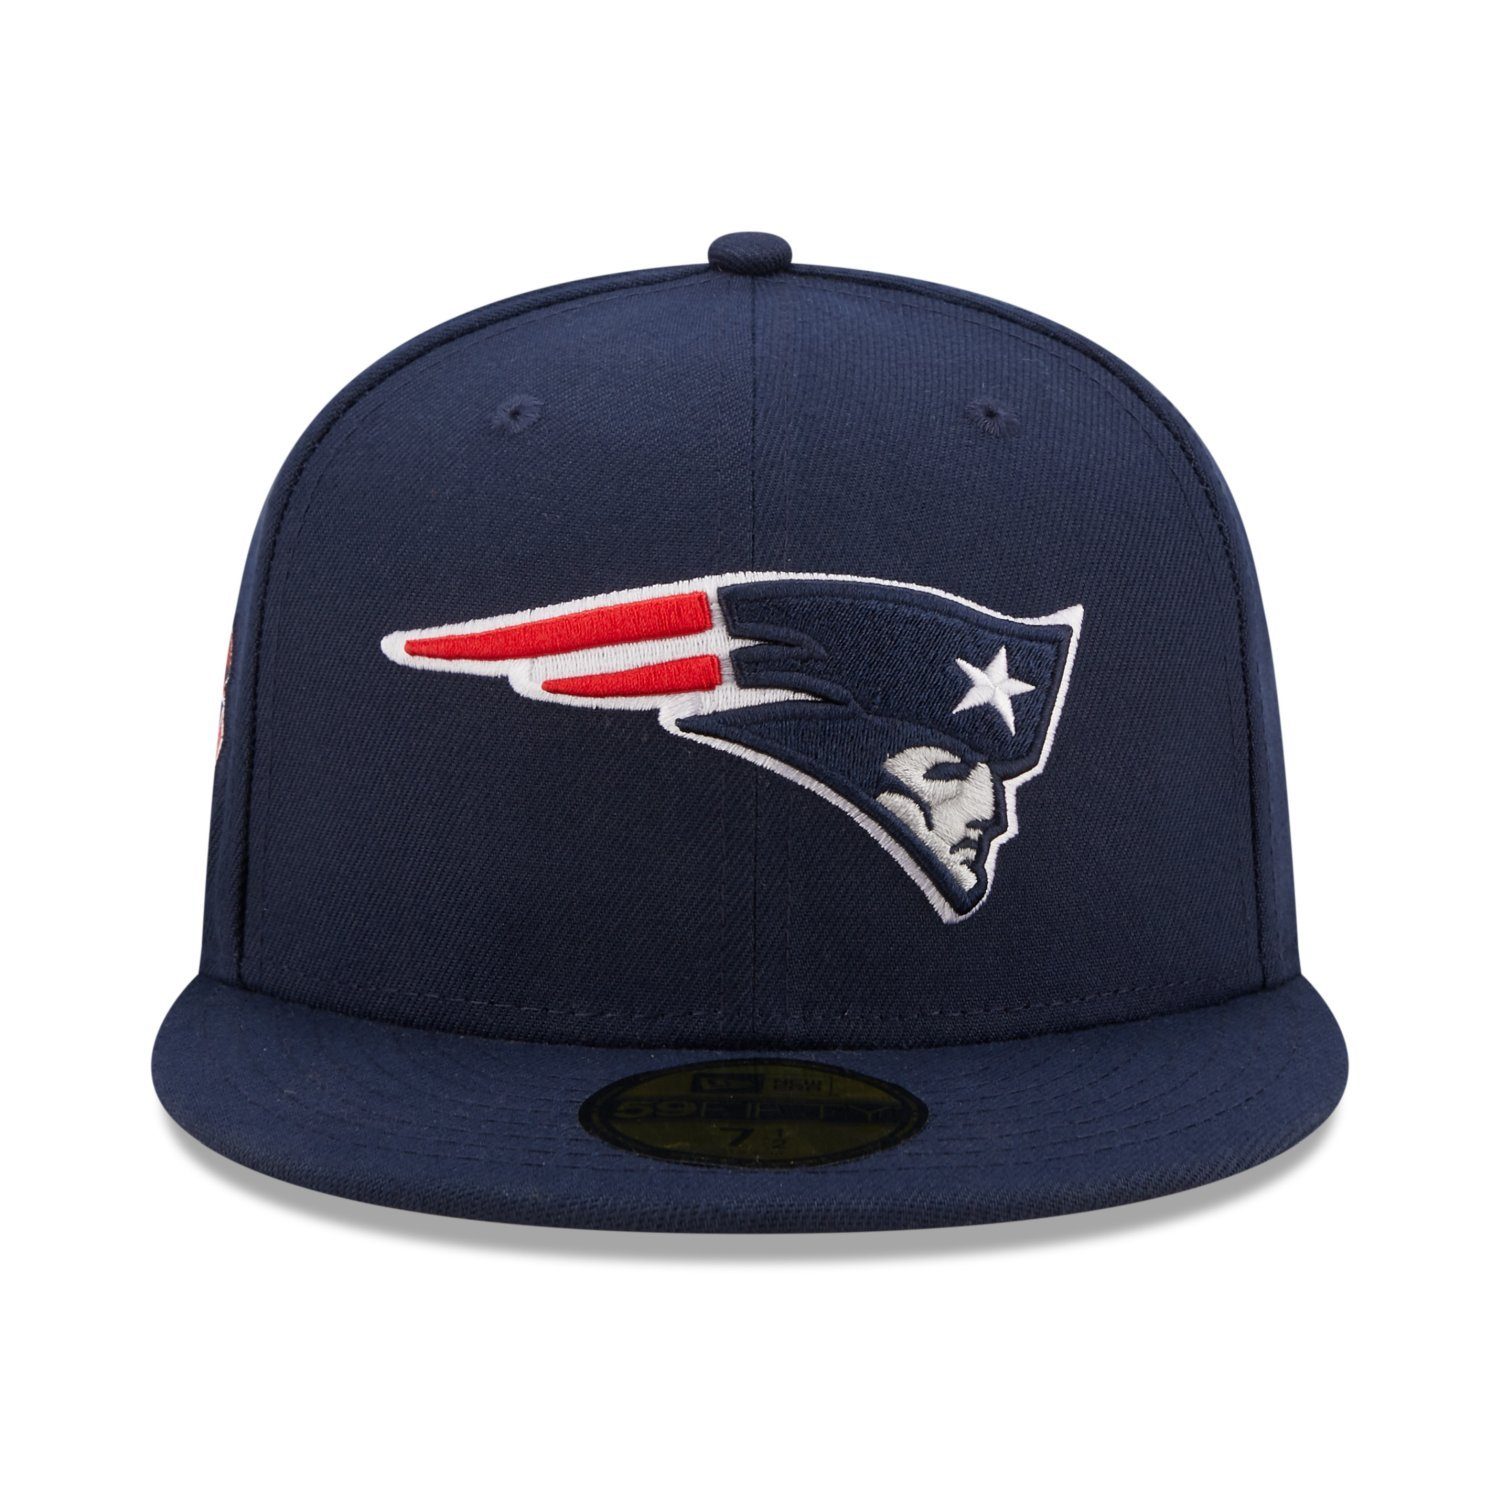 New SIDE Era Cap PATCH Fitted 59Fifty New England Patriots